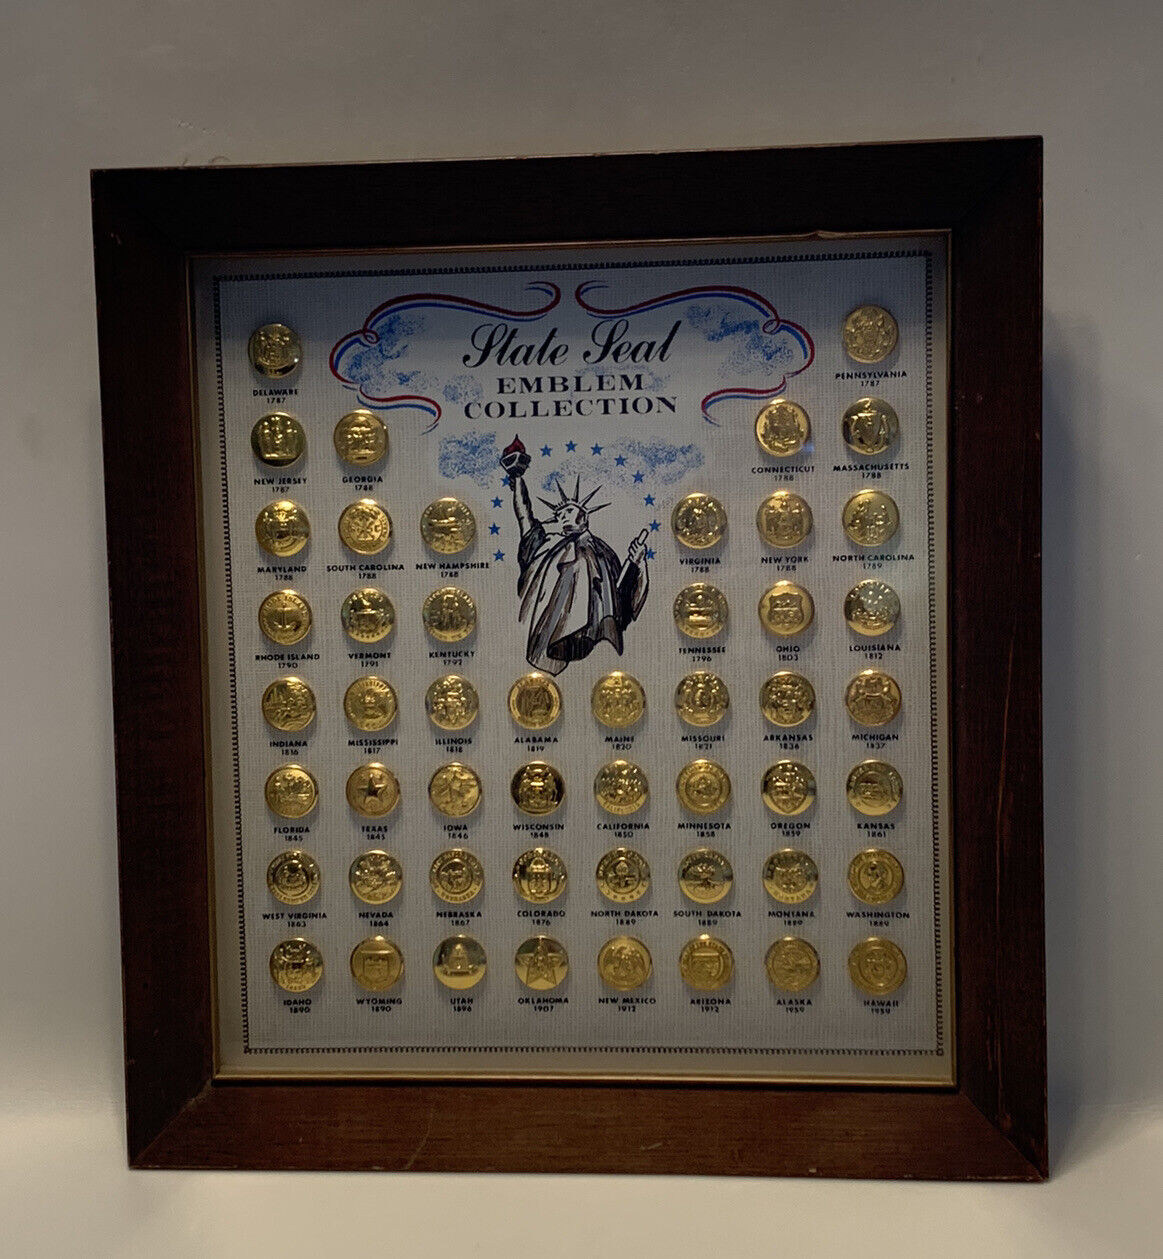 VINTAGE WATERBURY CO. STATE SEAL EMBLEM COLLECTION BUTTONS FRAMED COMPLETE SET